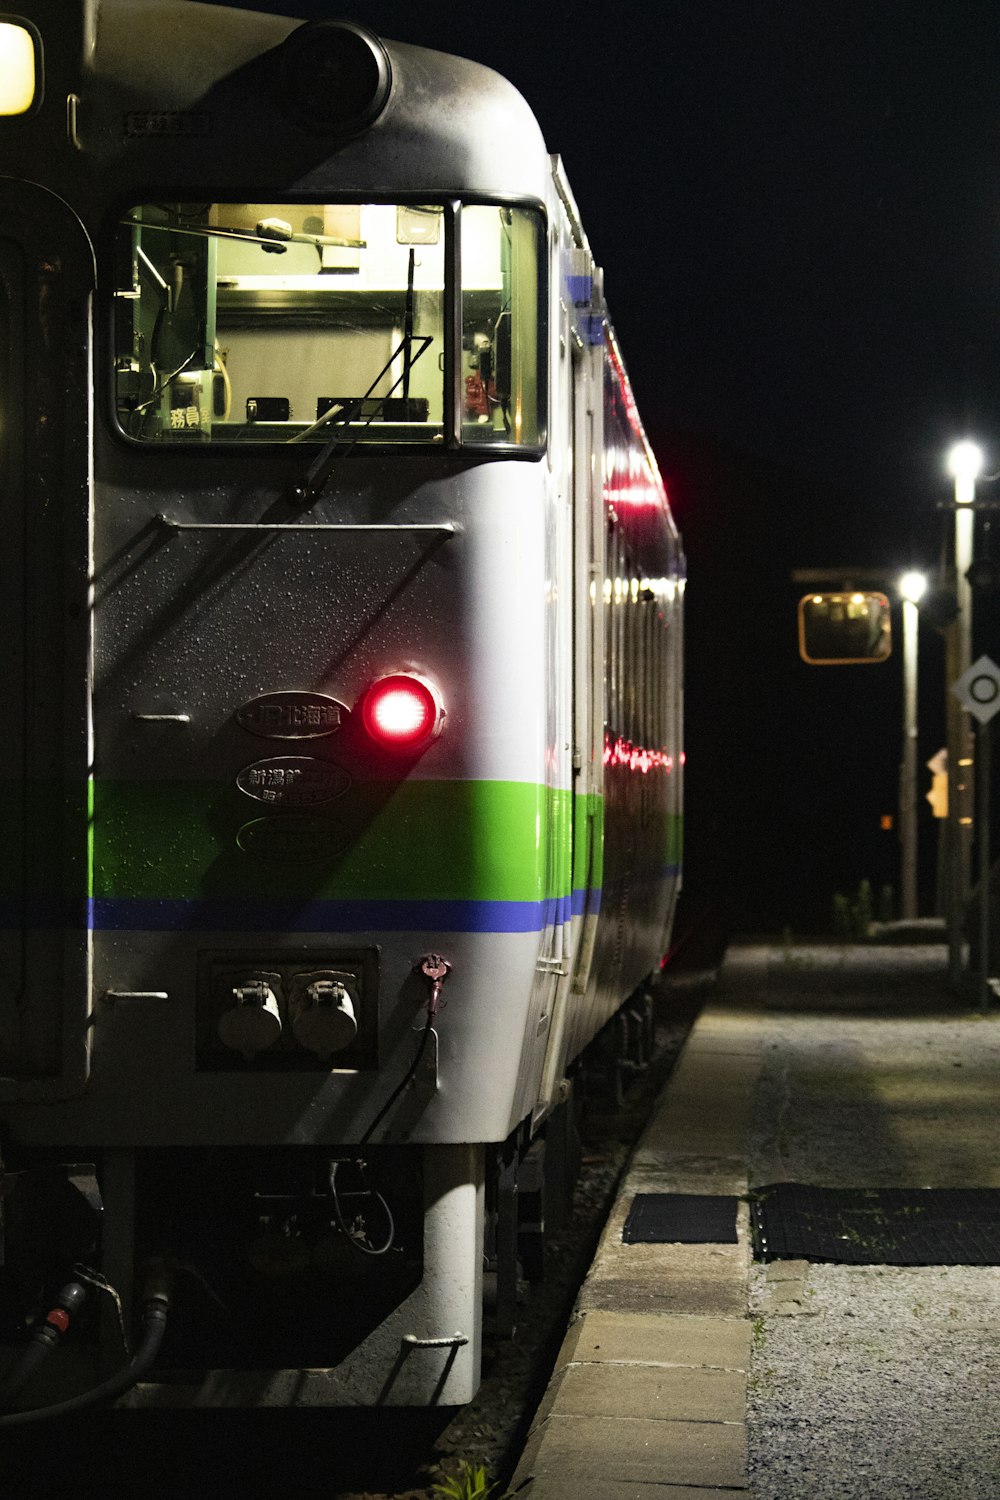 green white and red train on rail during night time